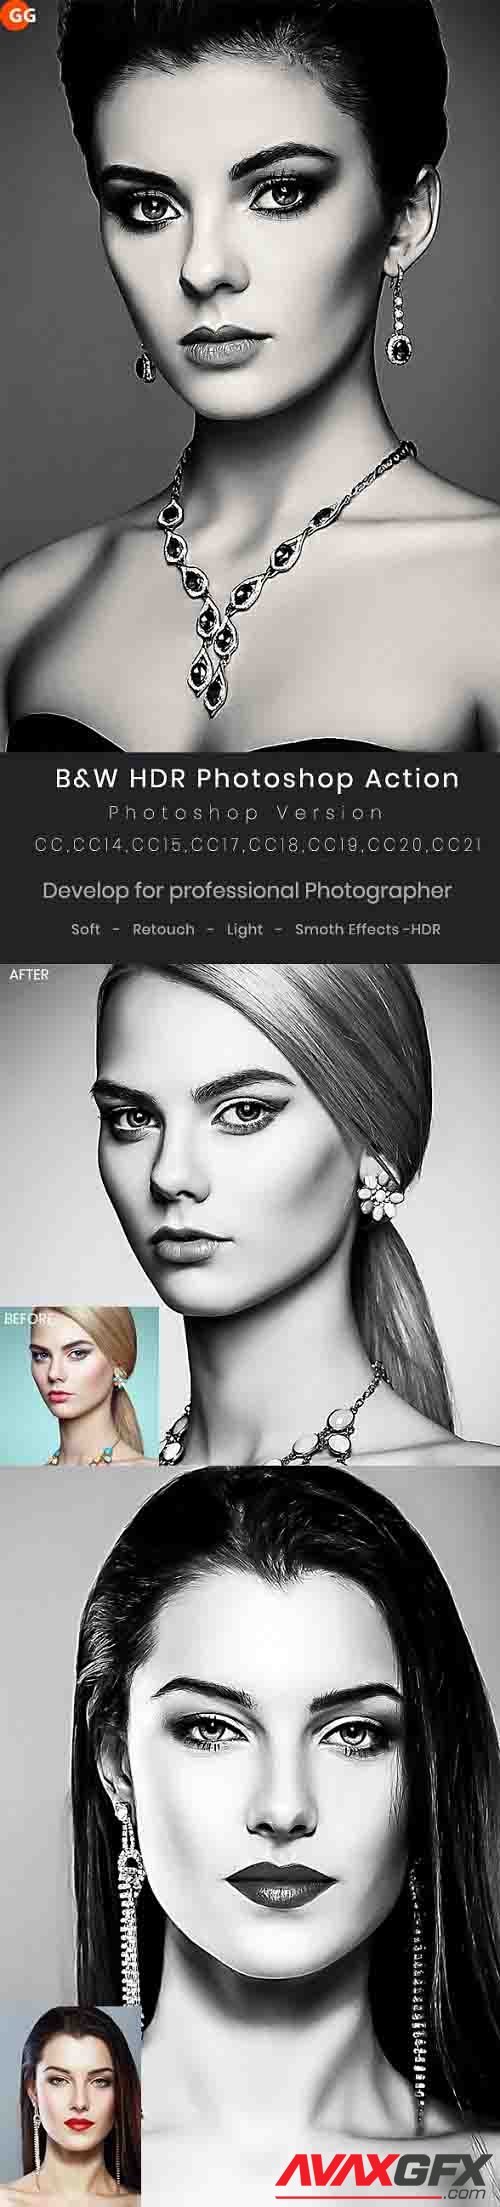 GraphicRiver - B&W HDR Photoshop Action 29947060